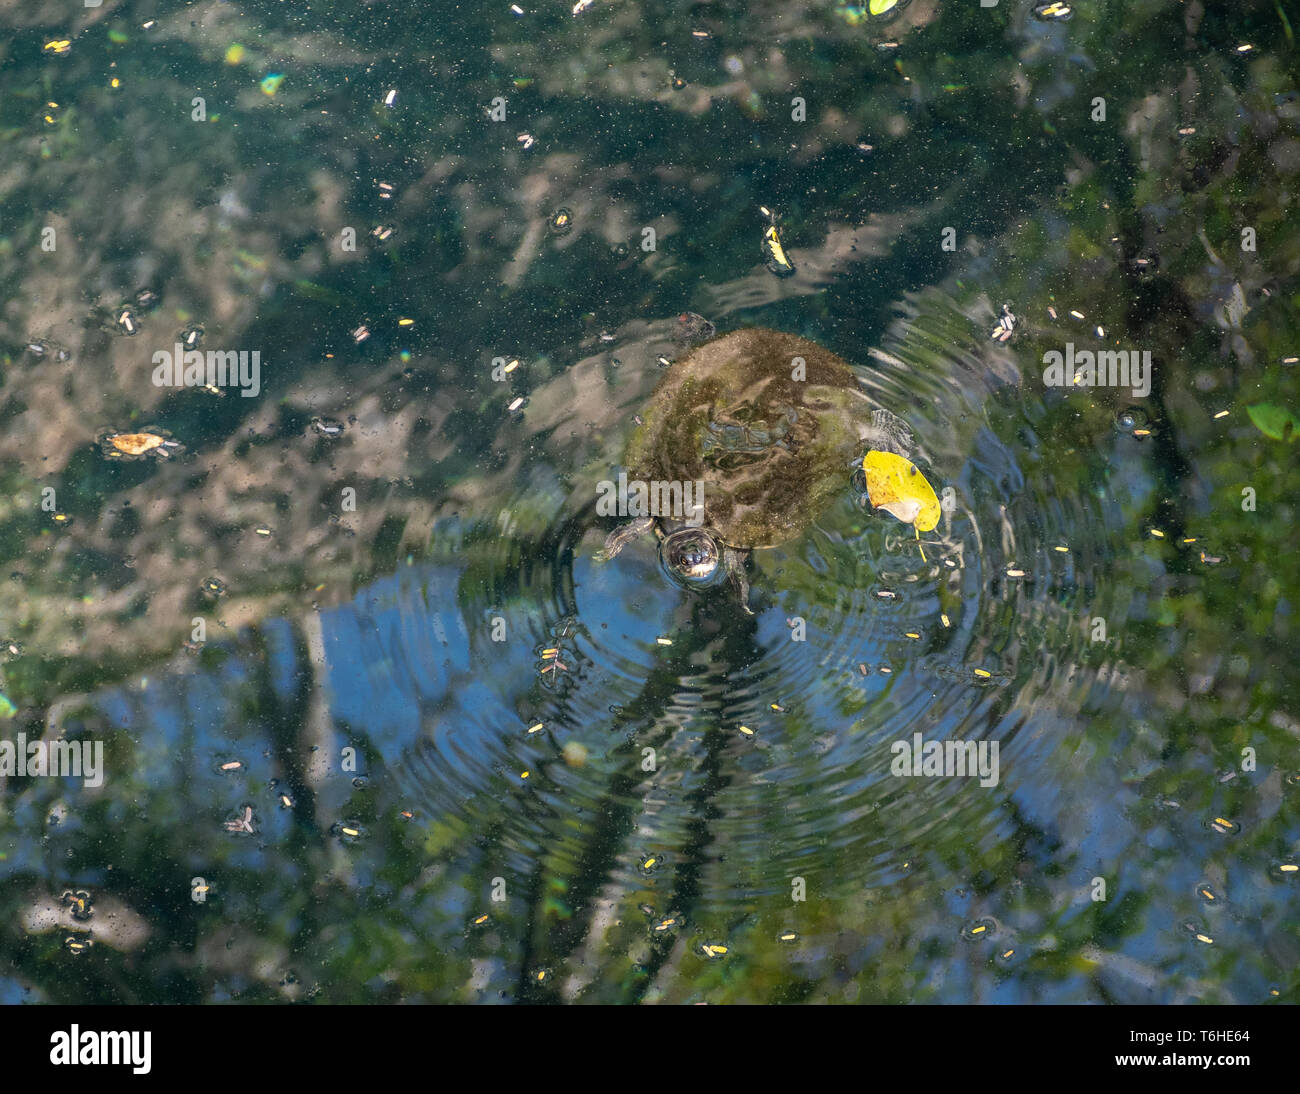 Moss-covered Cuban slider turtle coming up for air in a cenote Stock Photo